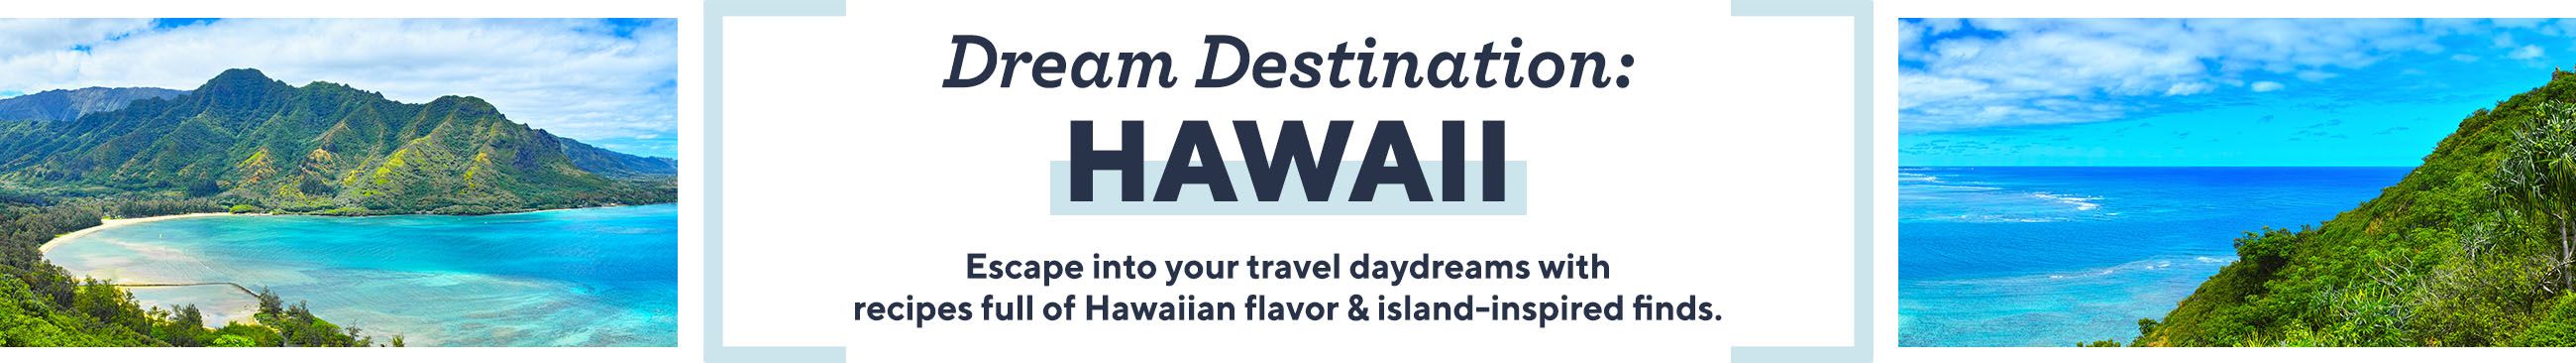 Dream Destination: Hawaii  Escape into your travel daydreams with recipes full of Hawaiian flavor & island-inspired finds.